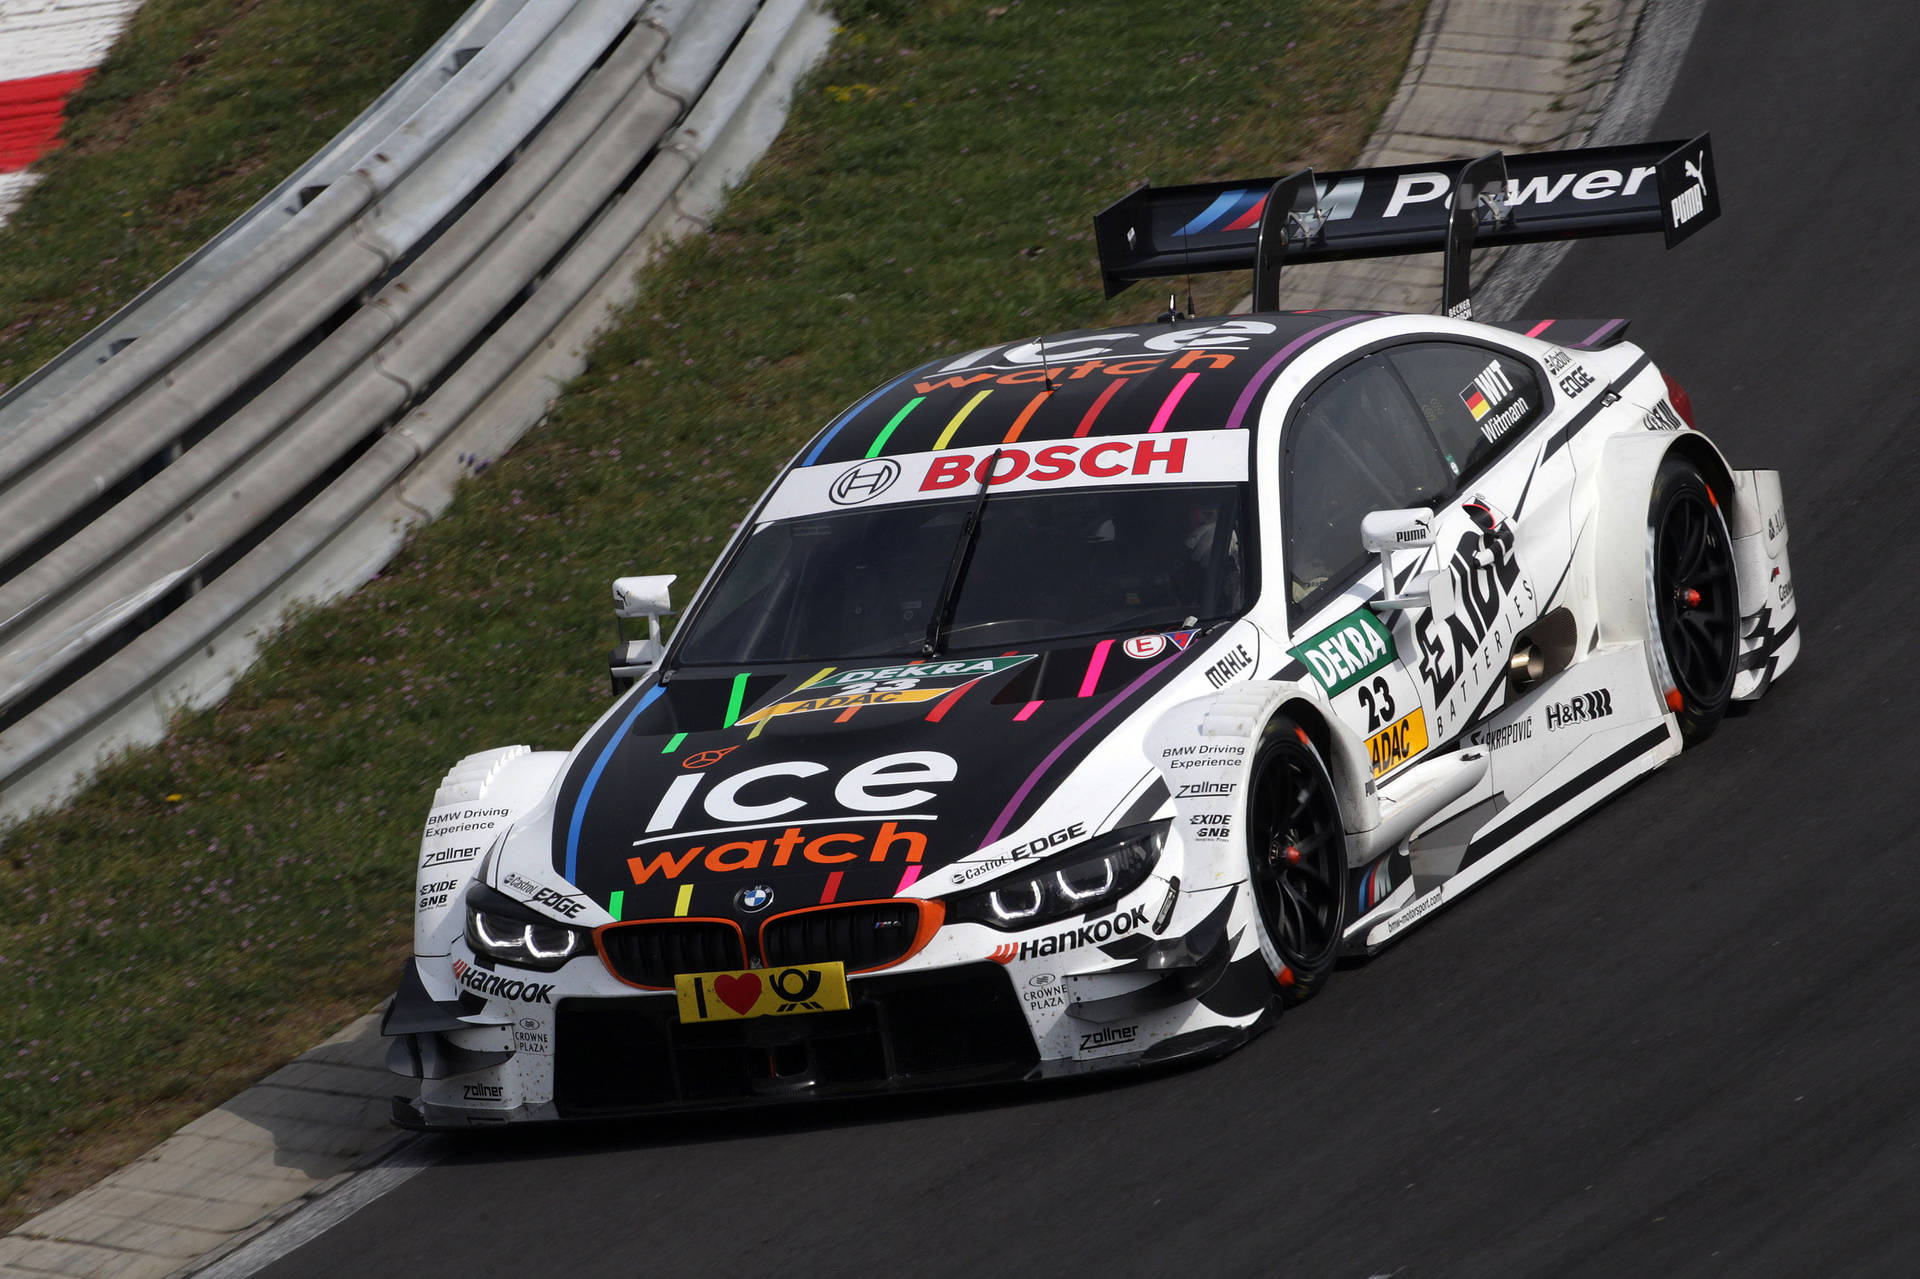 The sleek and agile BMW M4 DTM car Wallpaper